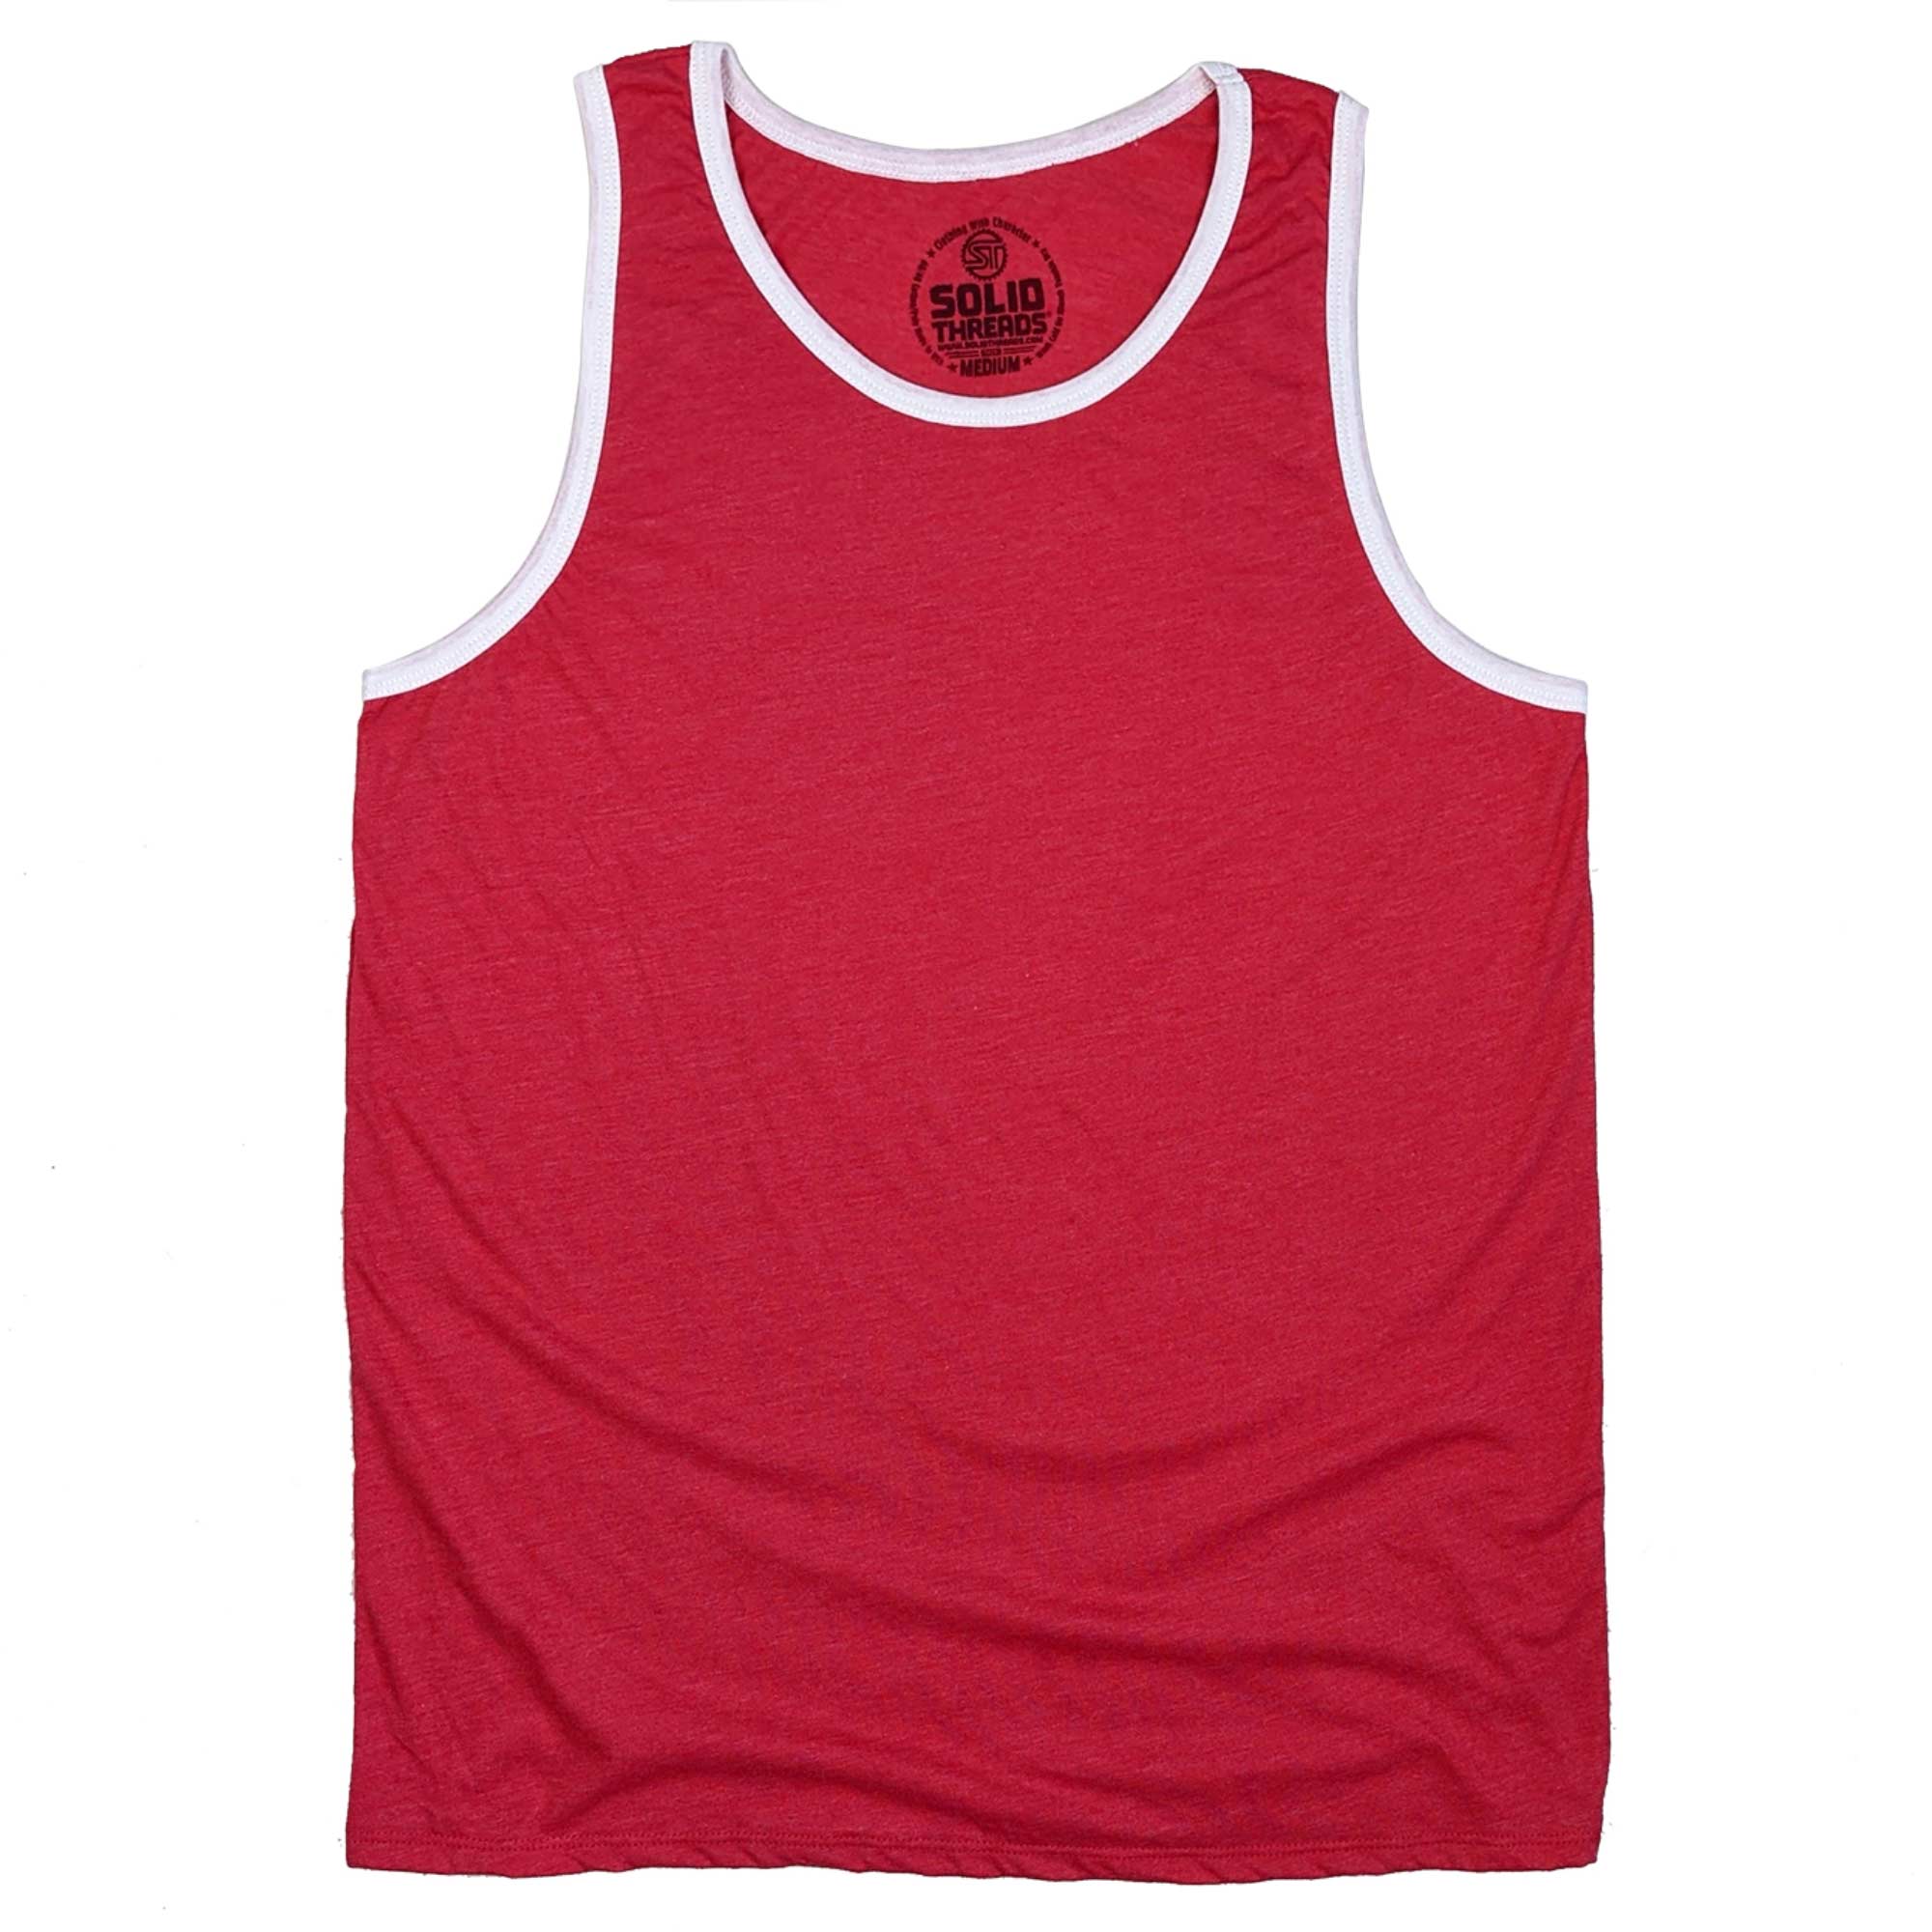 Men's Solid Threads Retro Ringer Tank Top Red/White | Vintage Inspired USA Made Tank Top